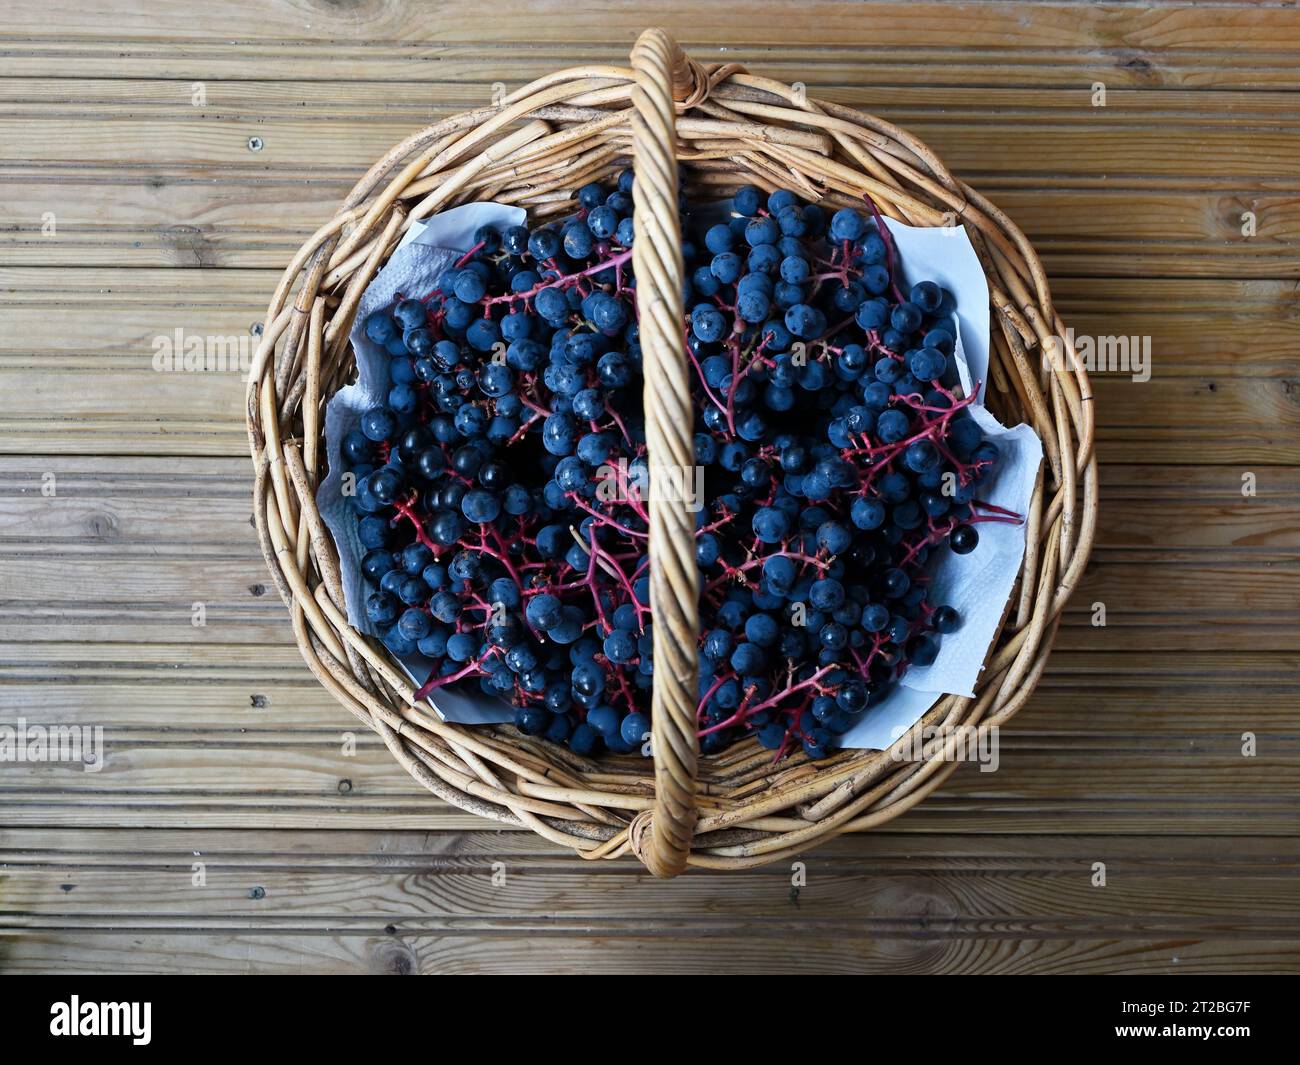 bunches of  blue ripe grapes in a wicker basket, top view Stock Photo